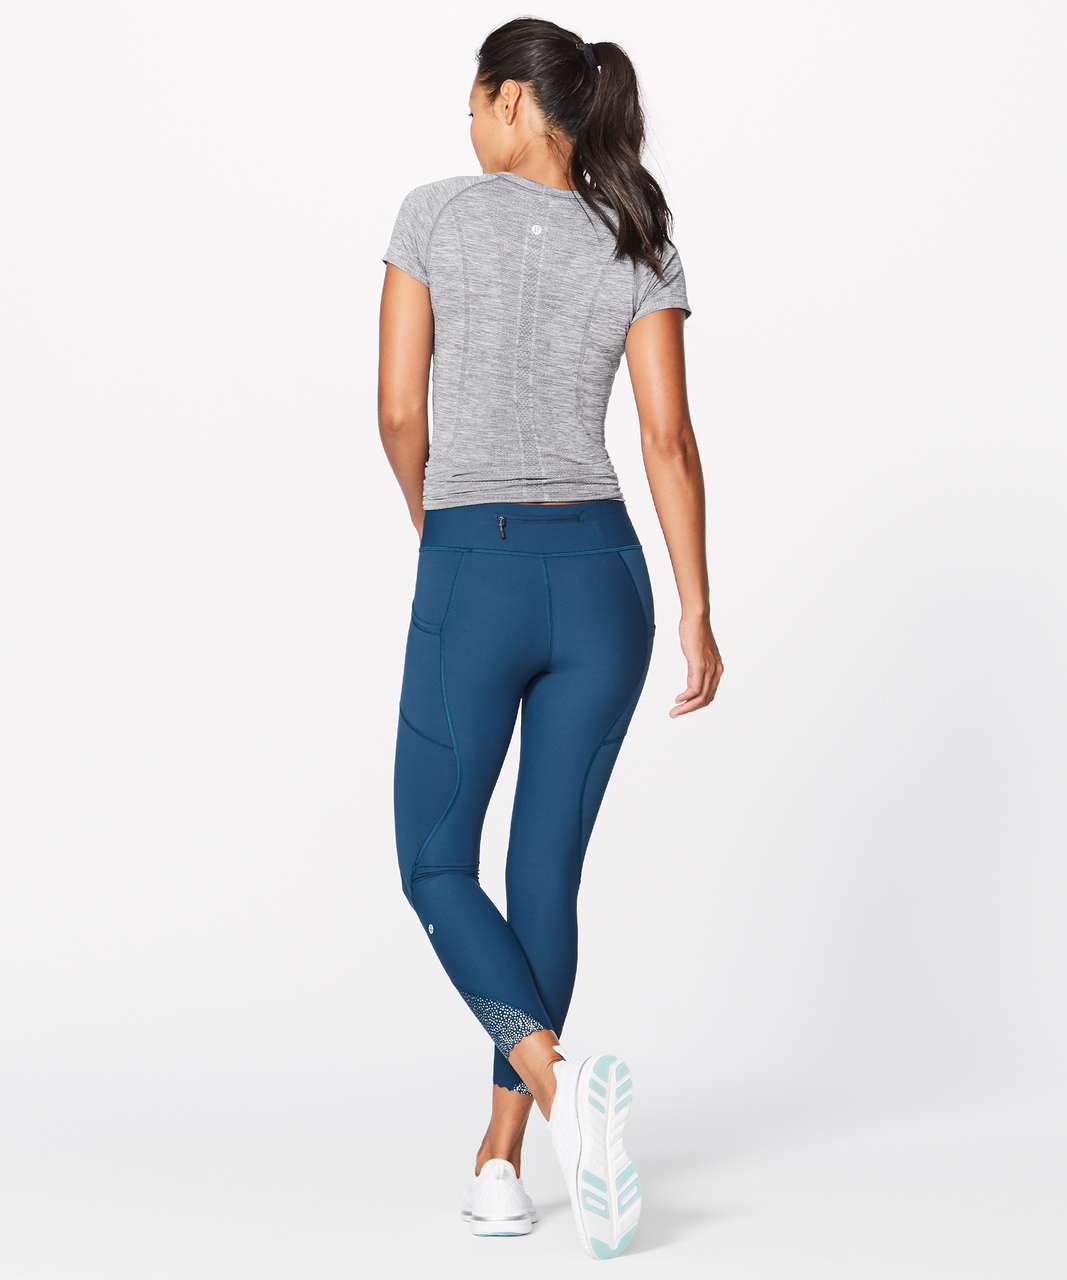 LULULEMON TIGHT STUFF Tight II (25) in Nocturnal Teal Size 4 EUC $148  £66.08 - PicClick UK